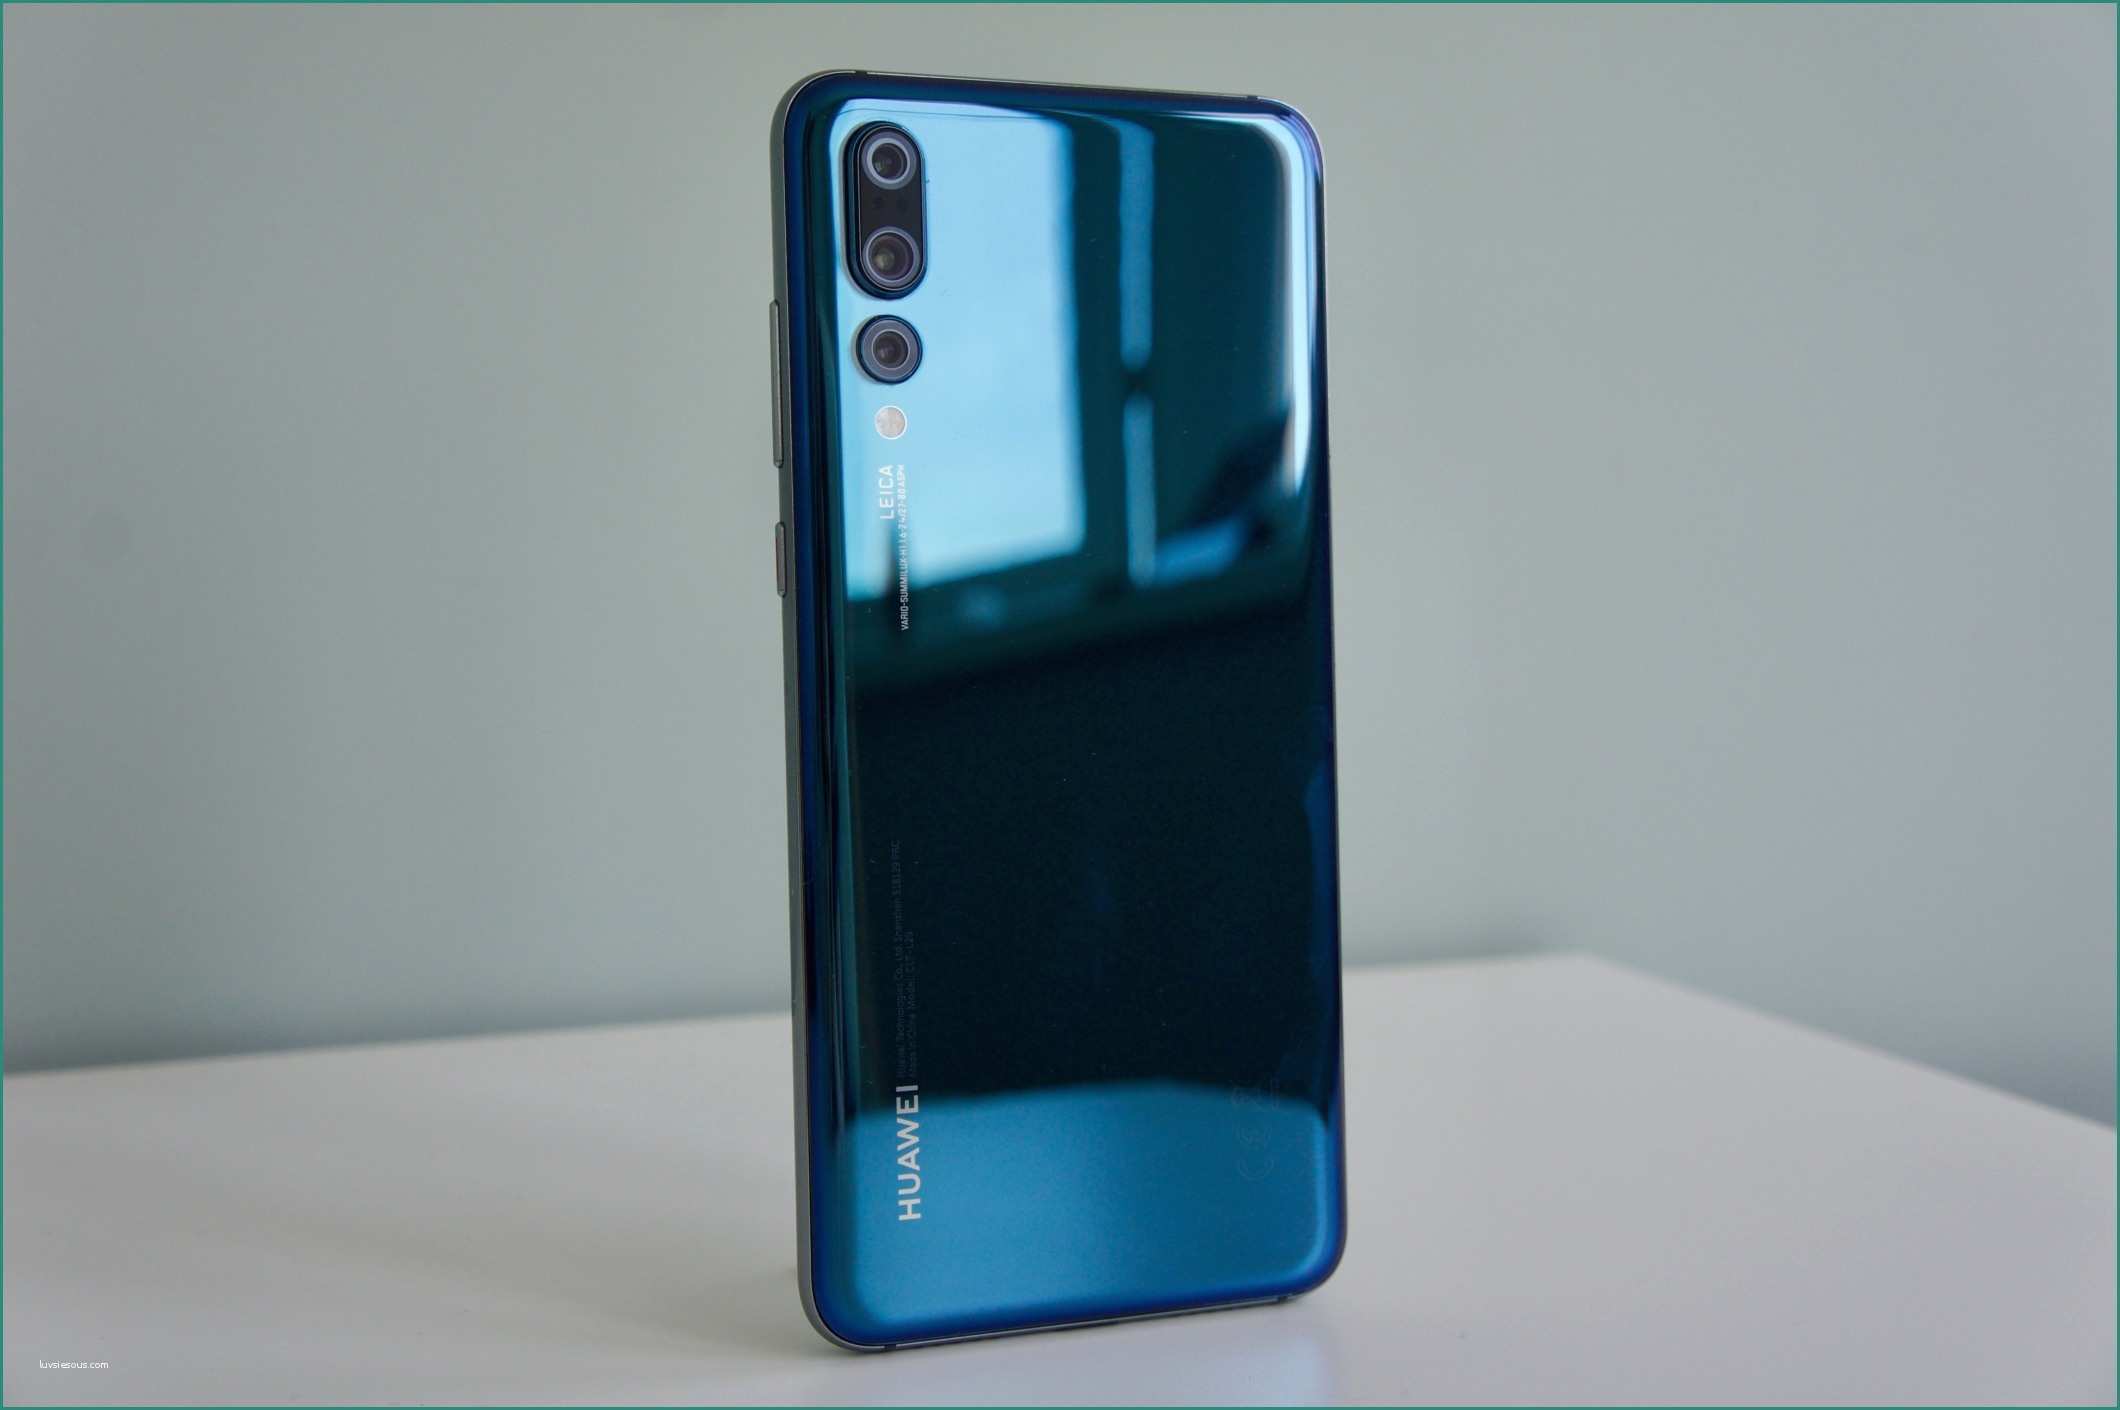 Case Mobili Moderne E Remove This Immediately A Review Of the Huawei P20 Pro